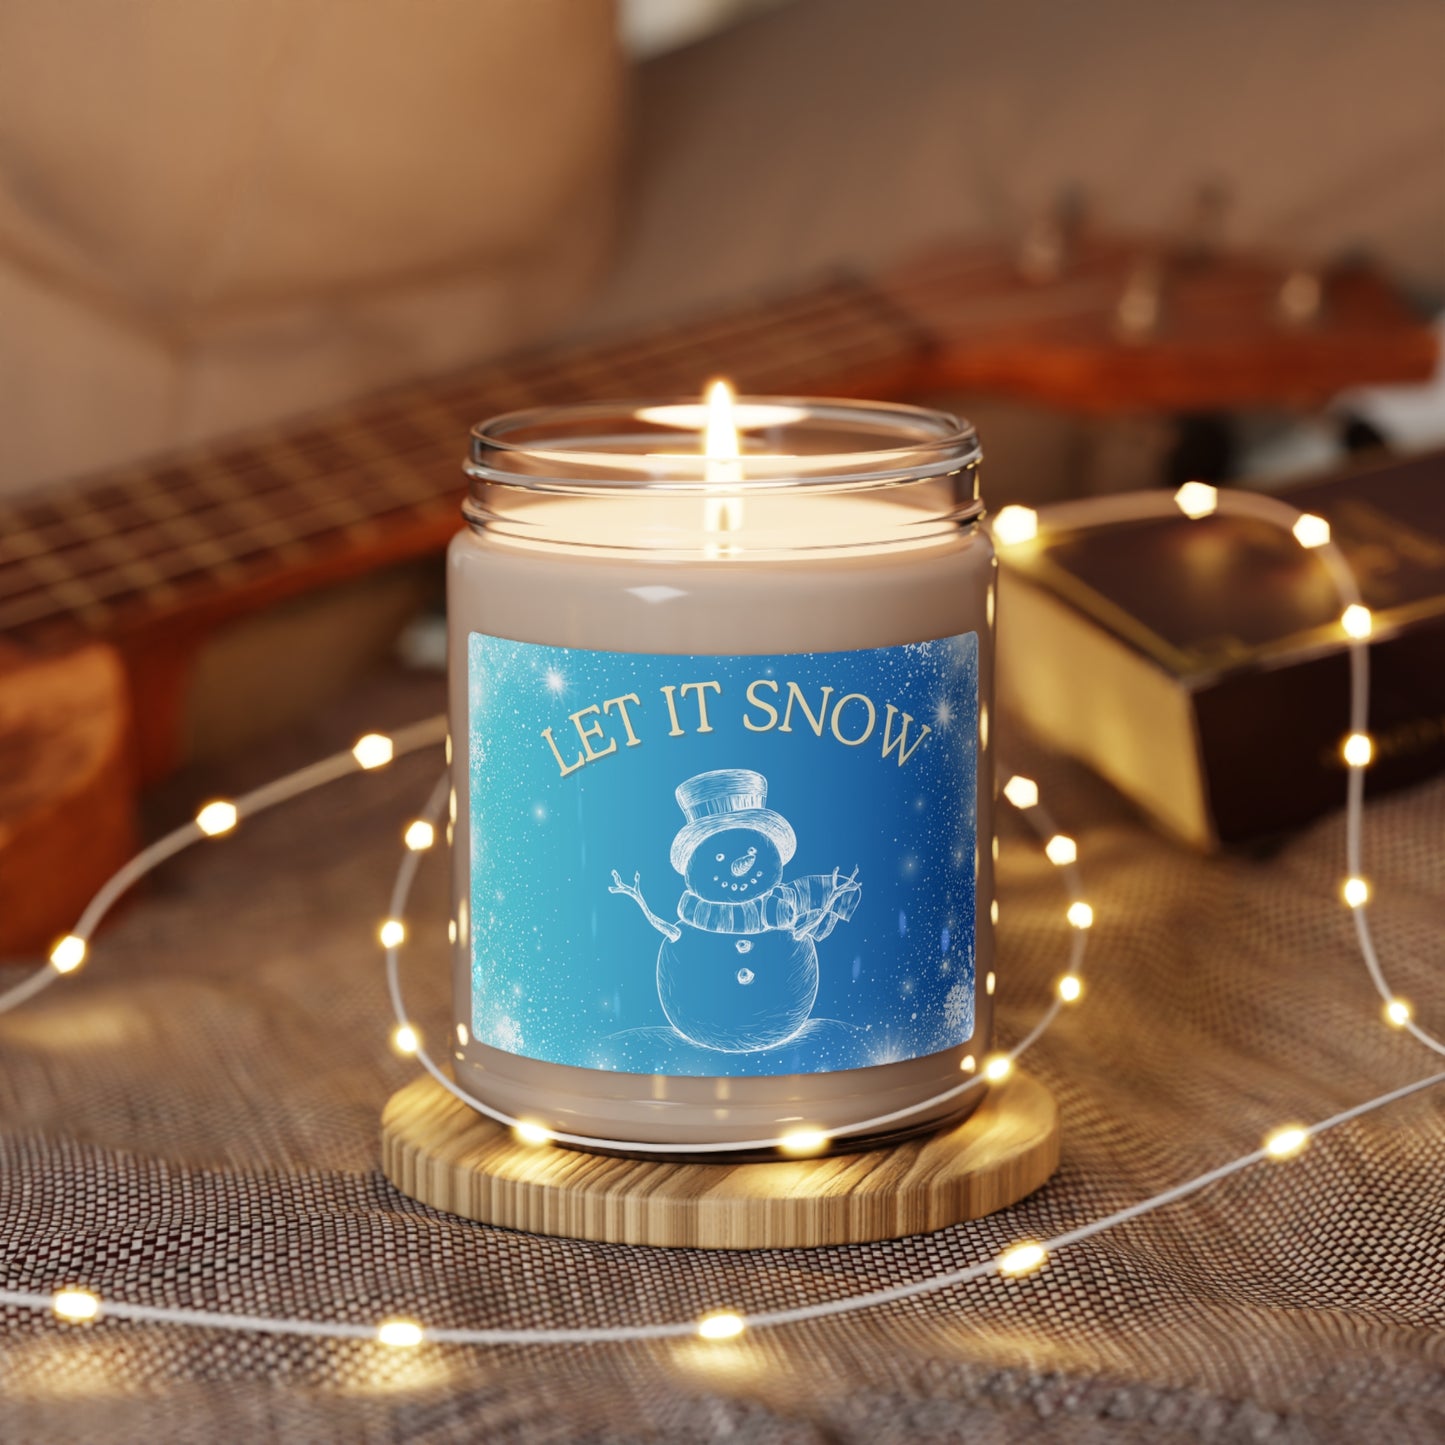 Let It Snow Scented Soy Candle, 9oz